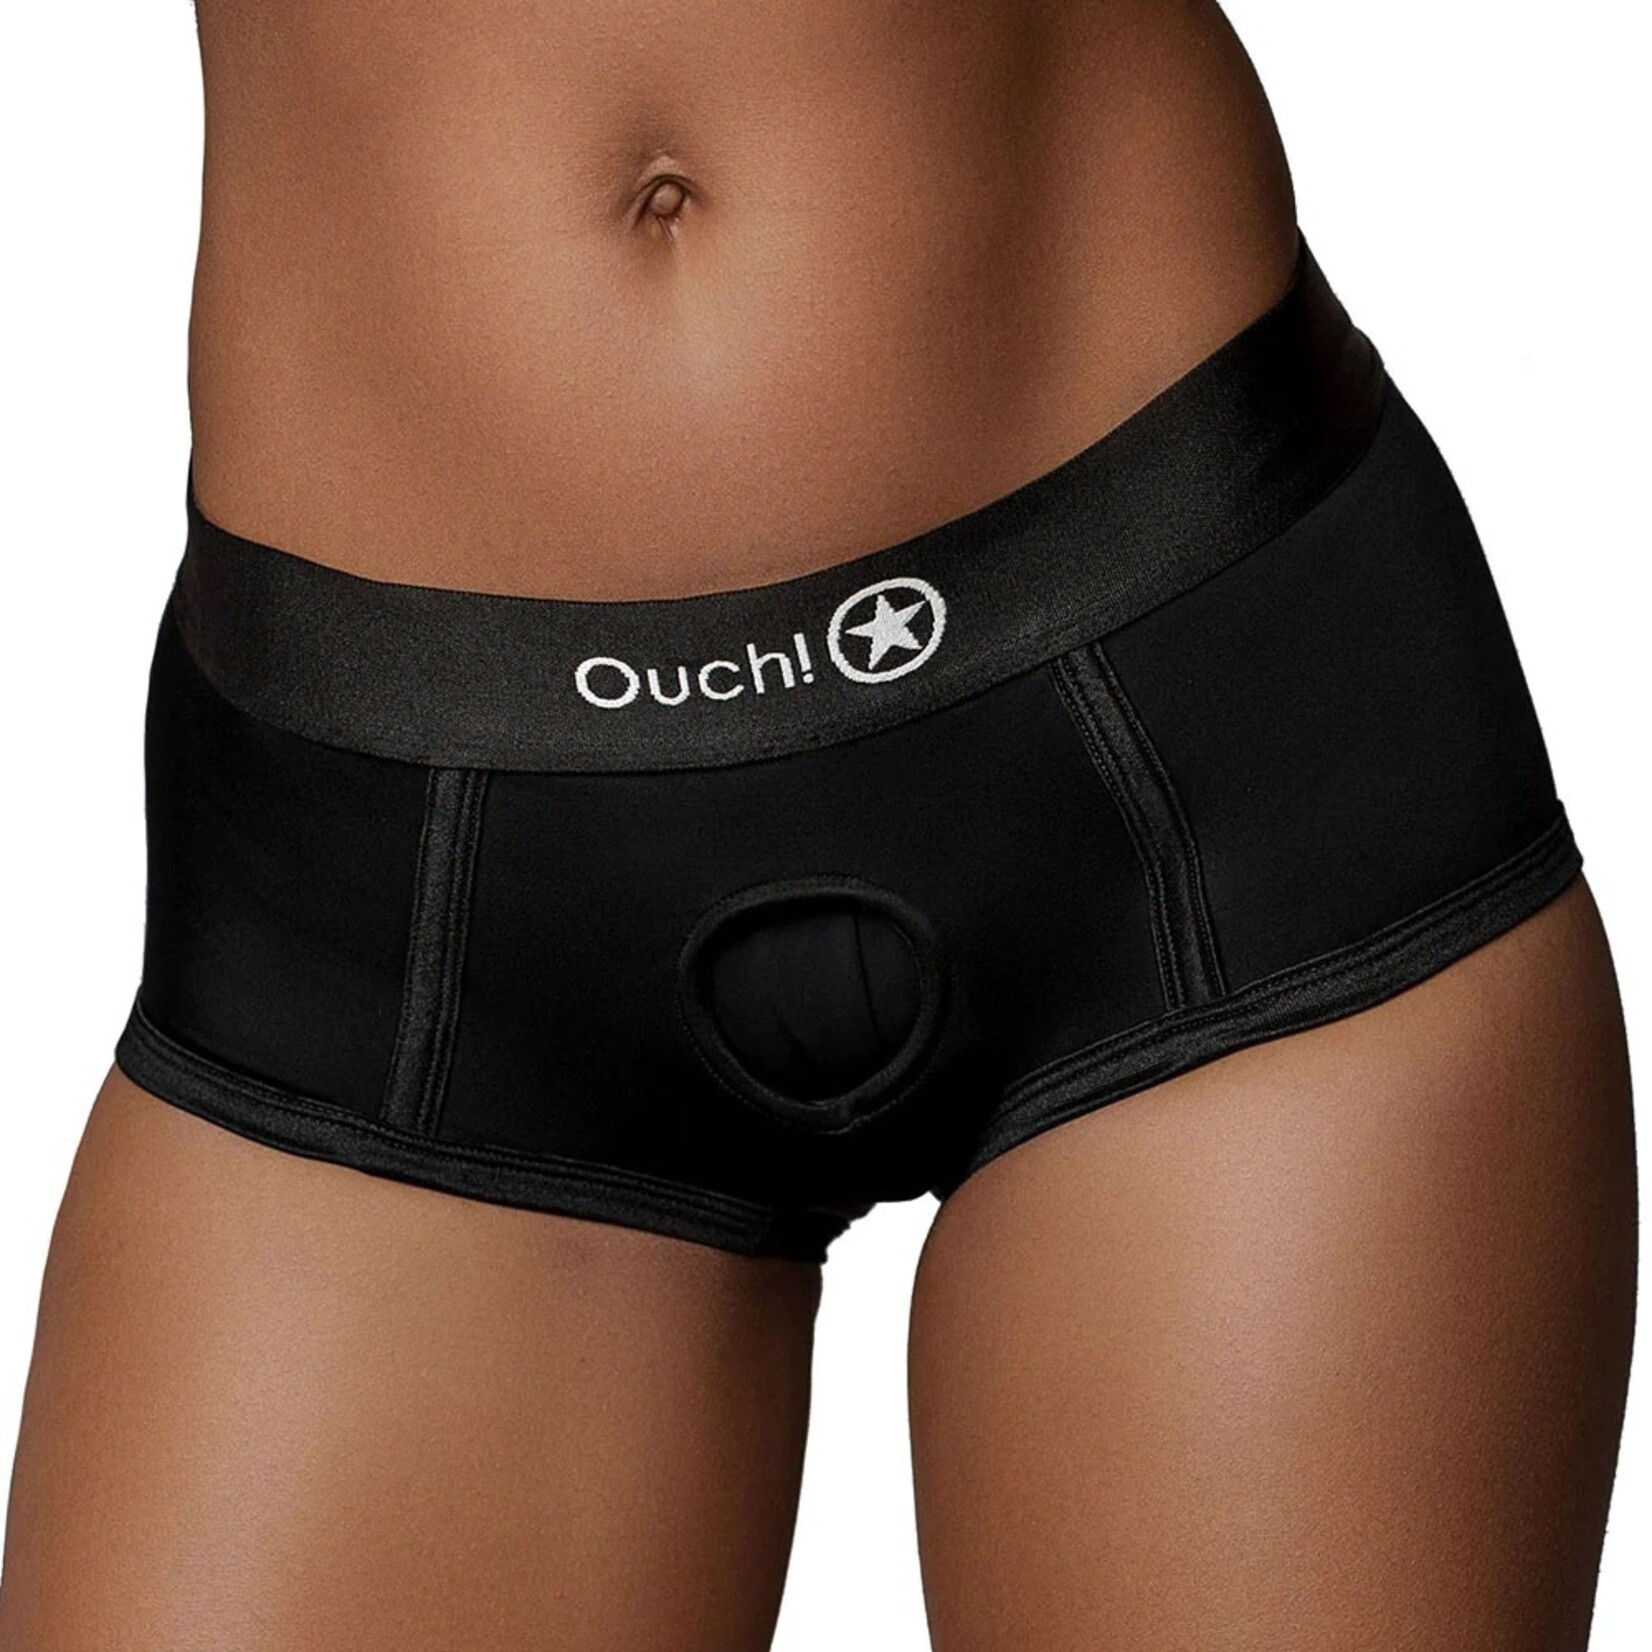 OUCH OUCH! BLACK VIBRATING STRAP-ON BRIEF M/L